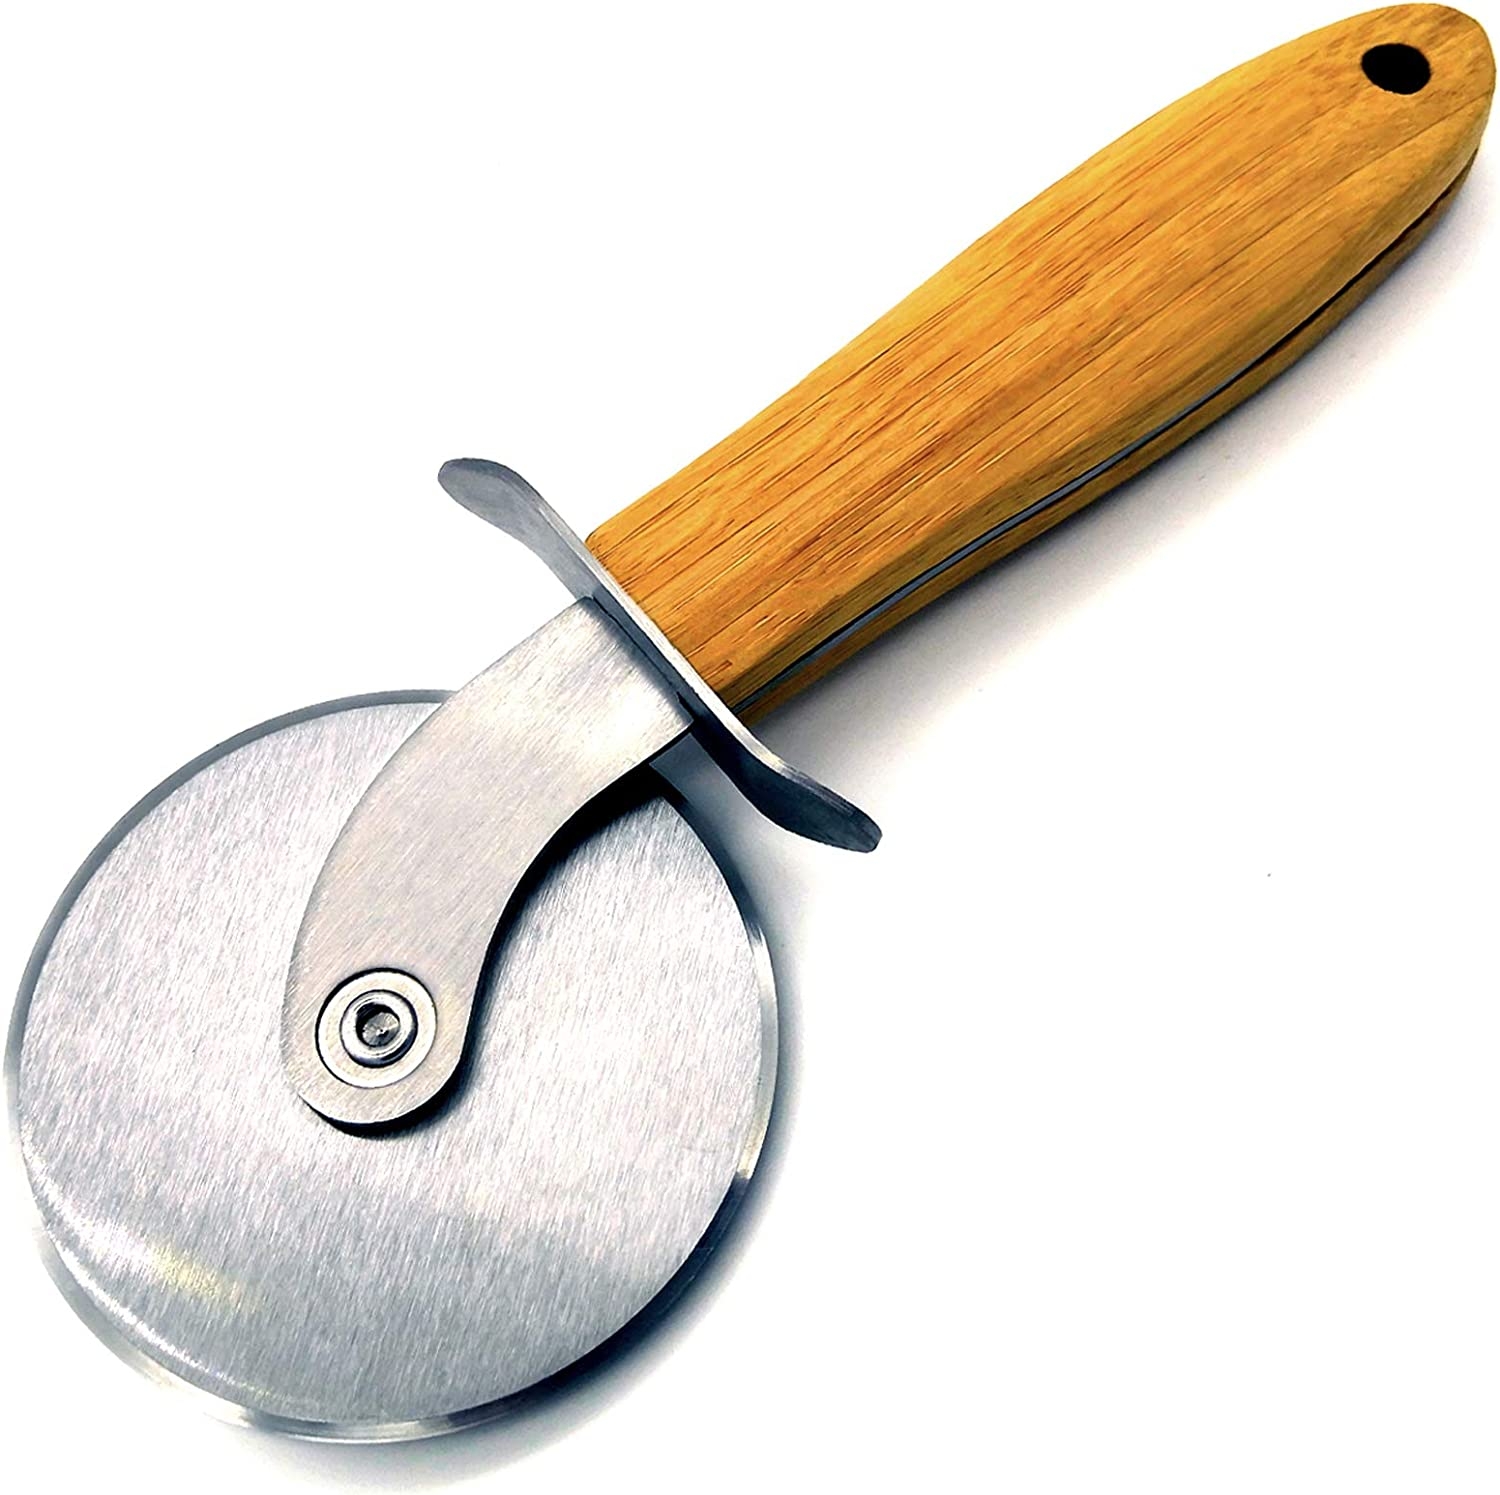 Pizza Cutter,Pizza Cutter Wheel, Quality Stainless Steel Pizza Cutter,Pizza Slicer with Wooden Non Slip Handle, Easy to Clean,